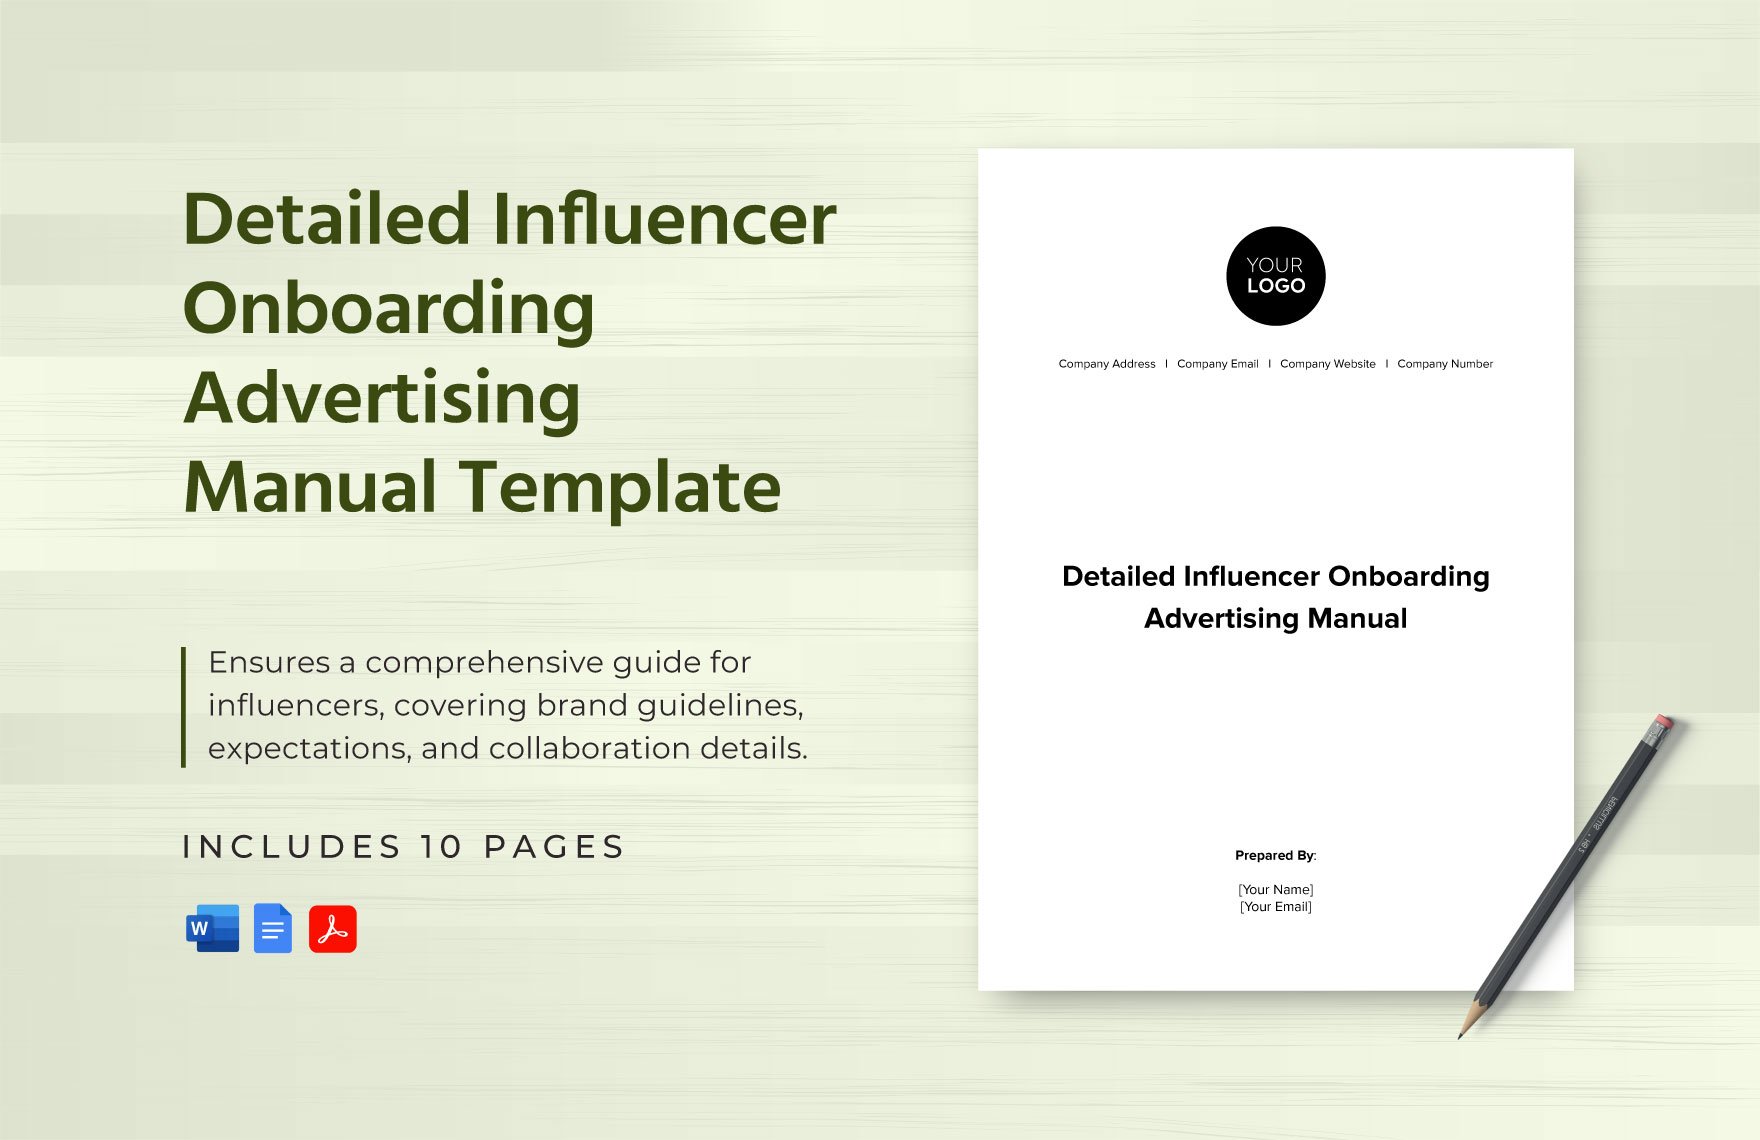 Detailed Influencer Onboarding Advertising Manual Template in Word, Google Docs, PDF